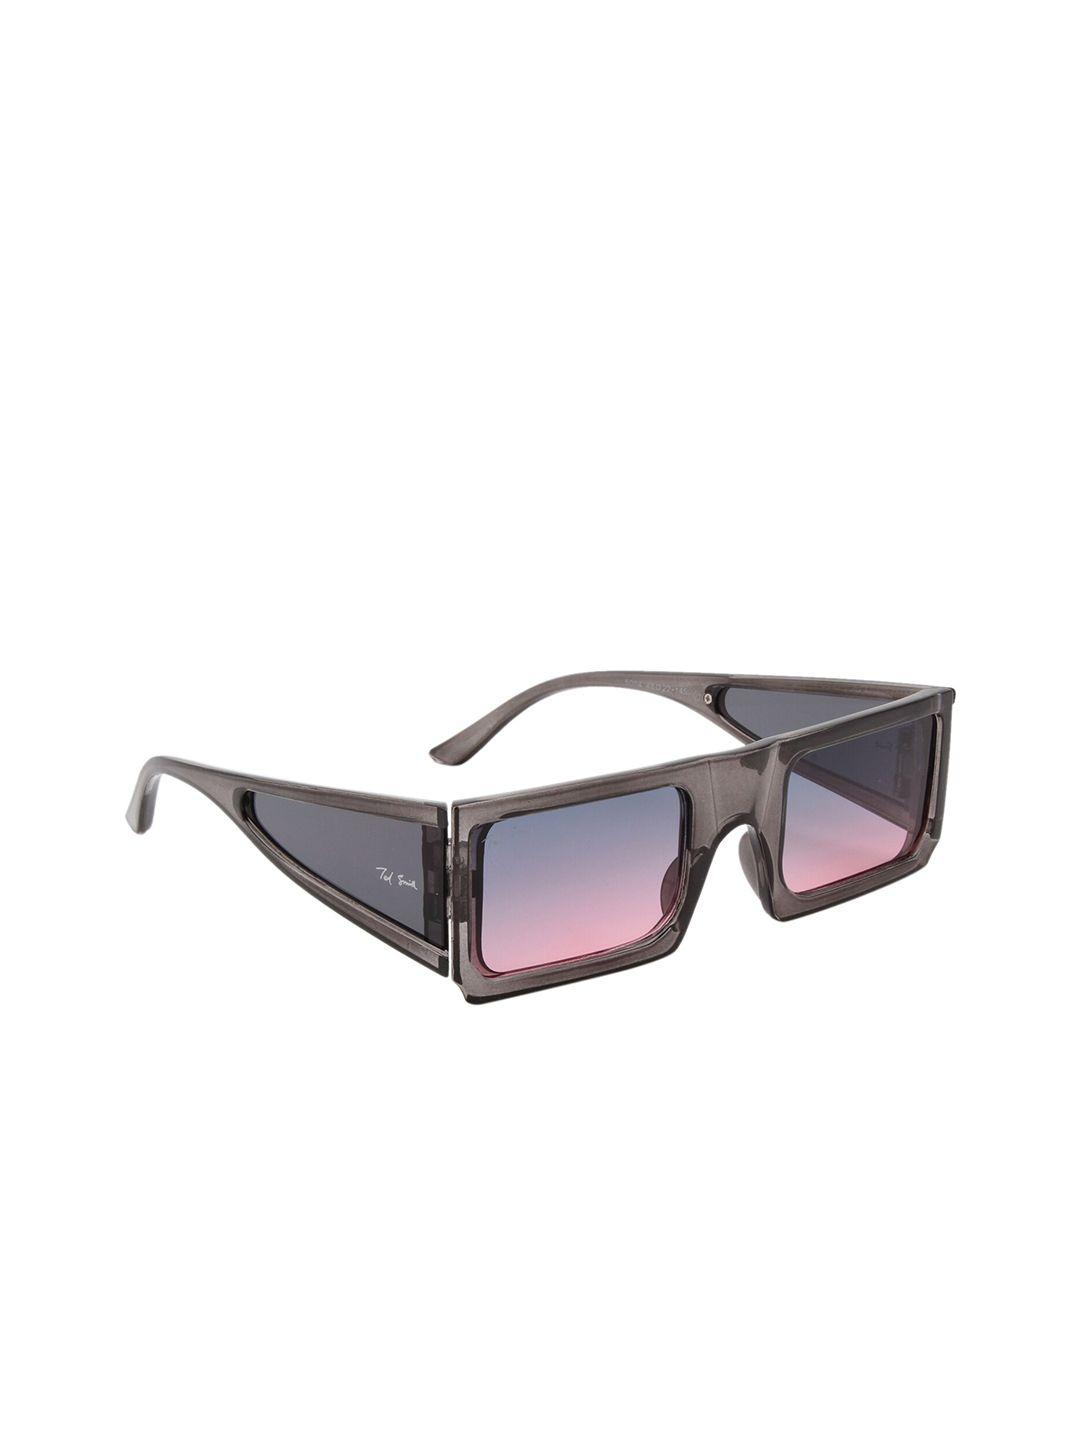 ted smith unisex pink lens & gunmetal-toned shield sunglasses with uv protected lens dope_c9